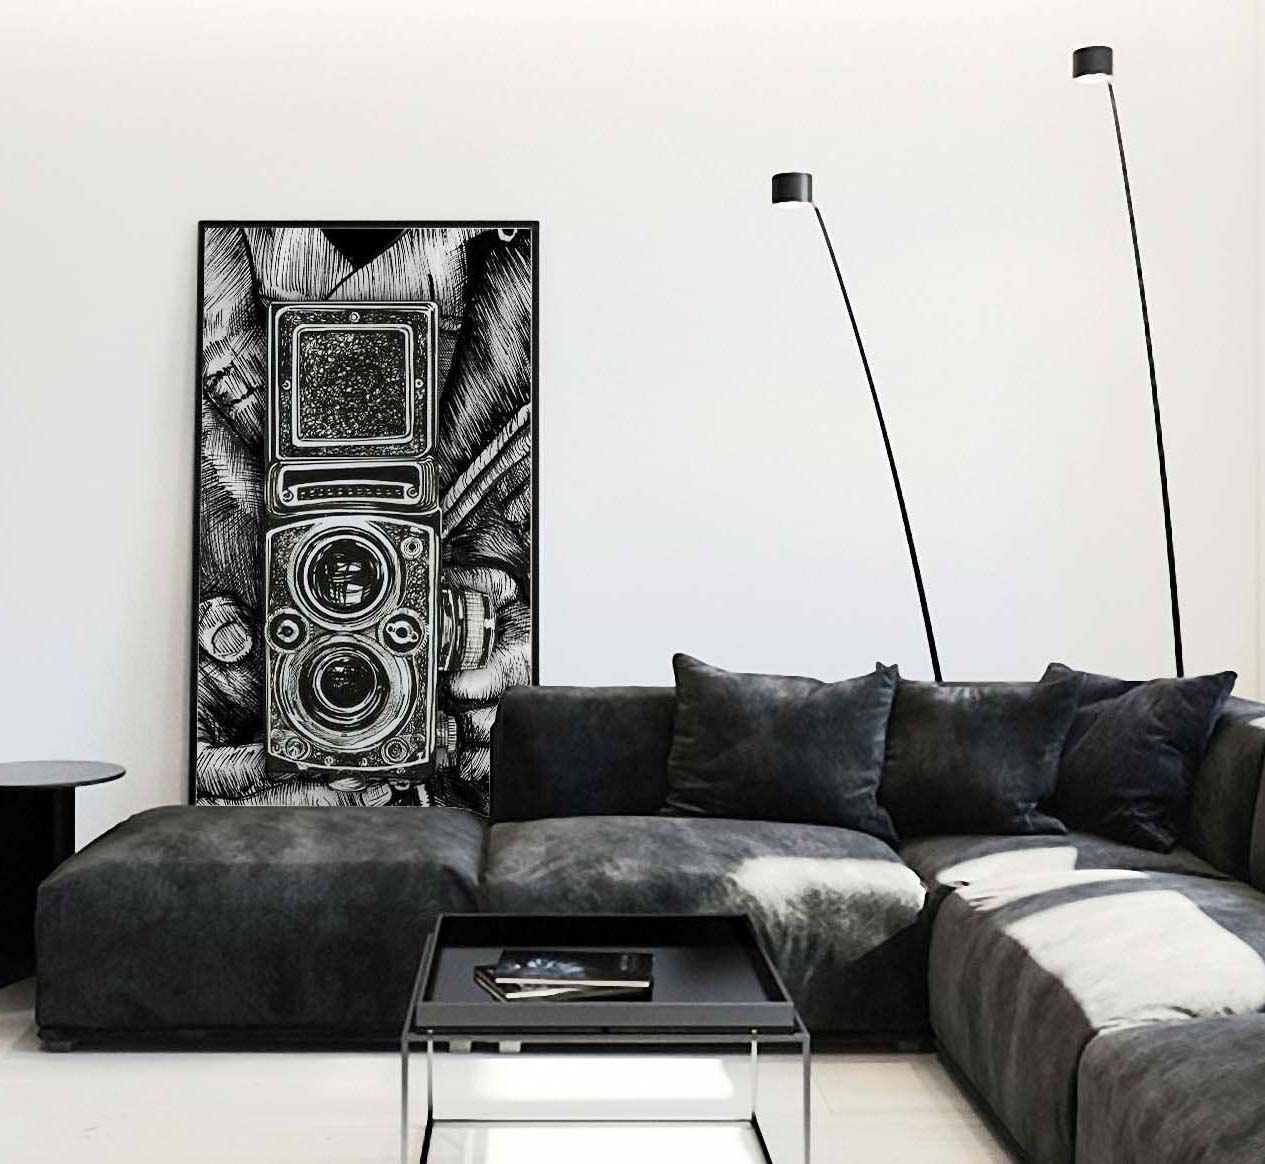 Leather Twin Lens Black and White framed poster leaning on wall behind suede couch